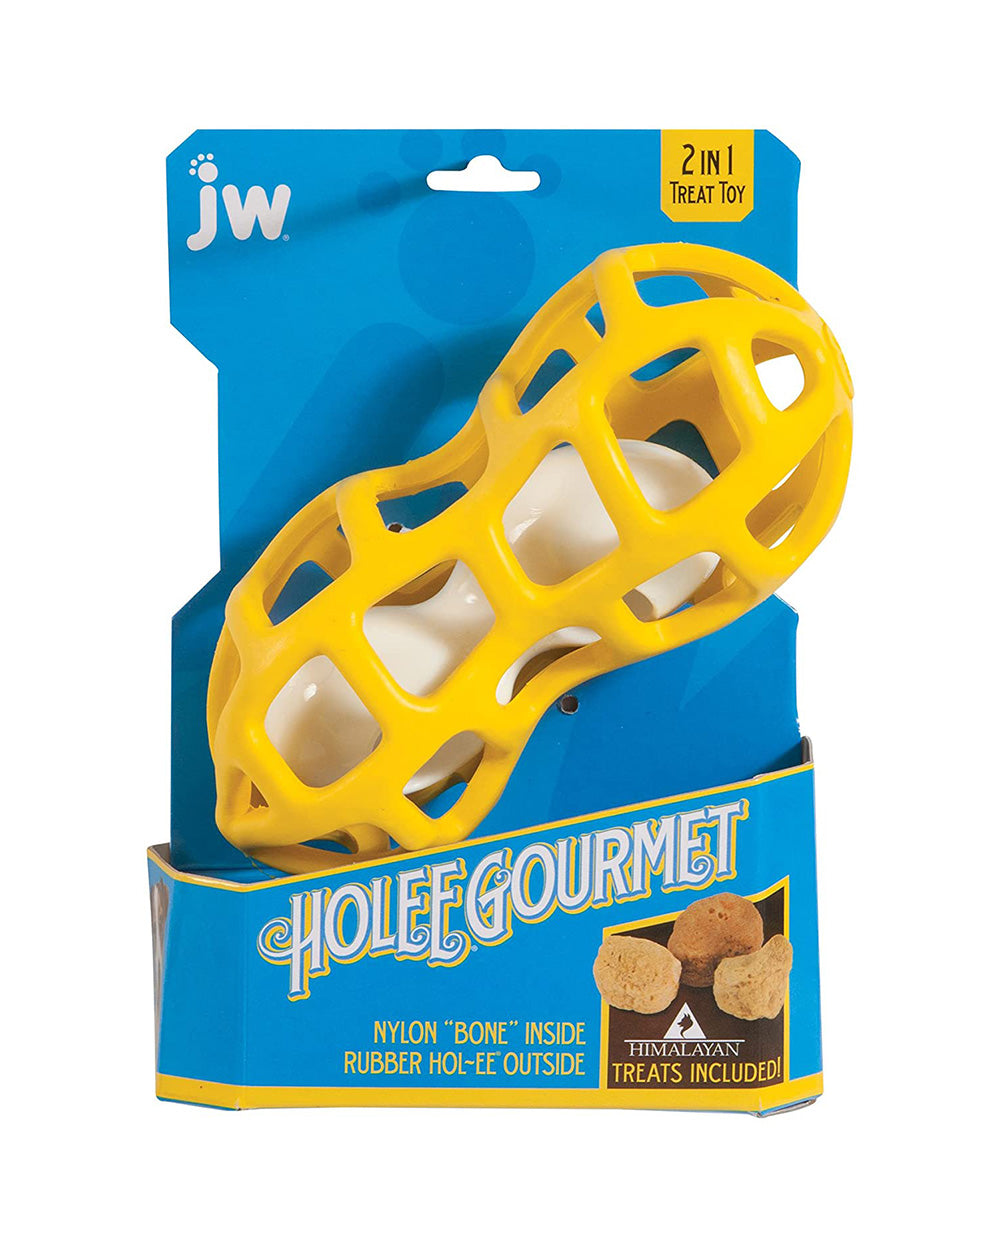 Hol-ee Gourmet Peanut Dog Chew Puzzle Toy